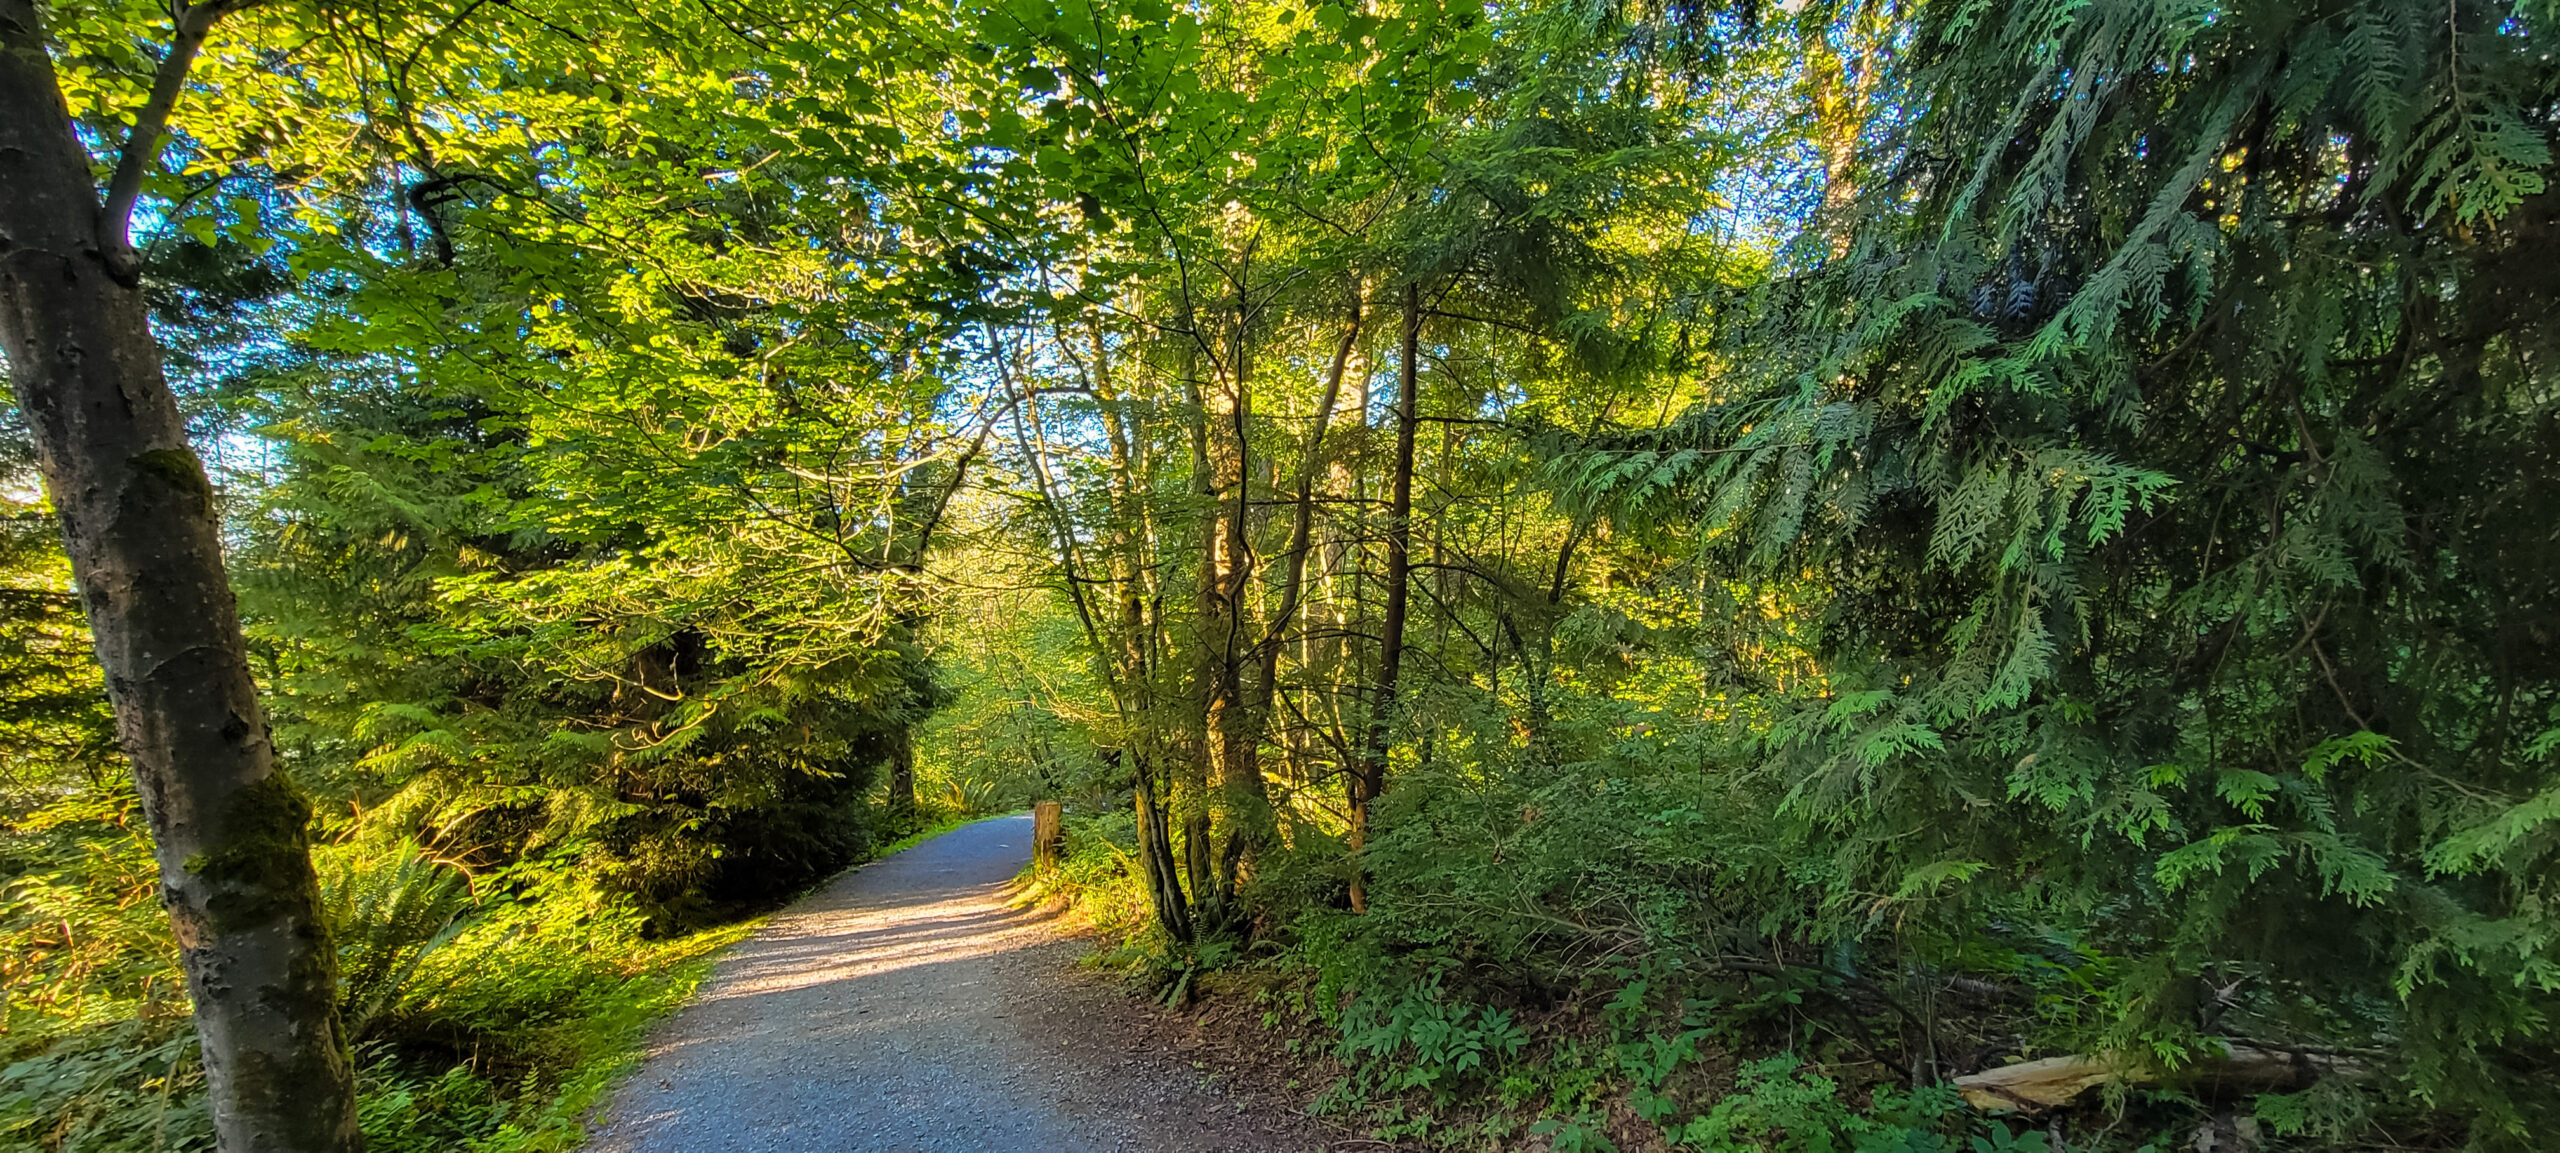 Photo of a path on Burnaby Mountain. The path is surrounded by forest and healthy trees.